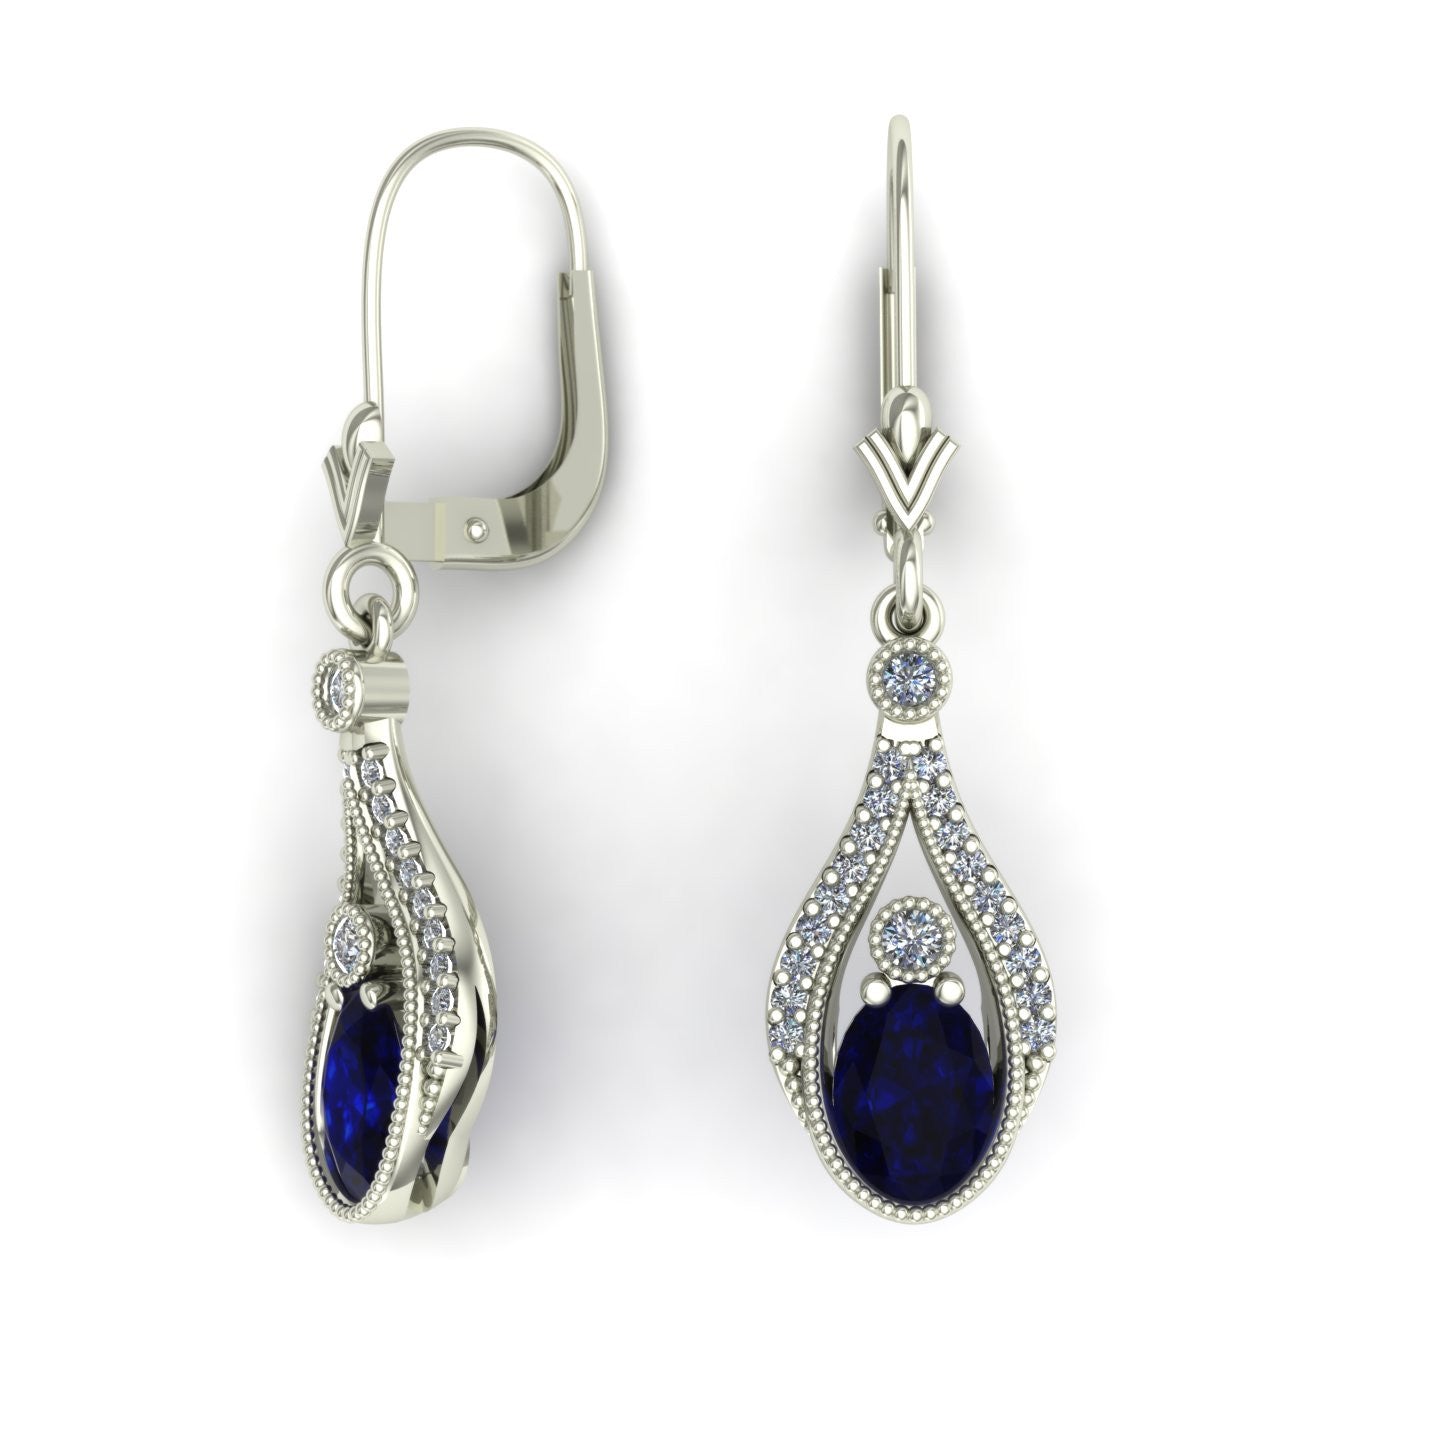 oval blue sapphire and diamond drop earrings in 14k white gold - Charles Babb Designs - 2